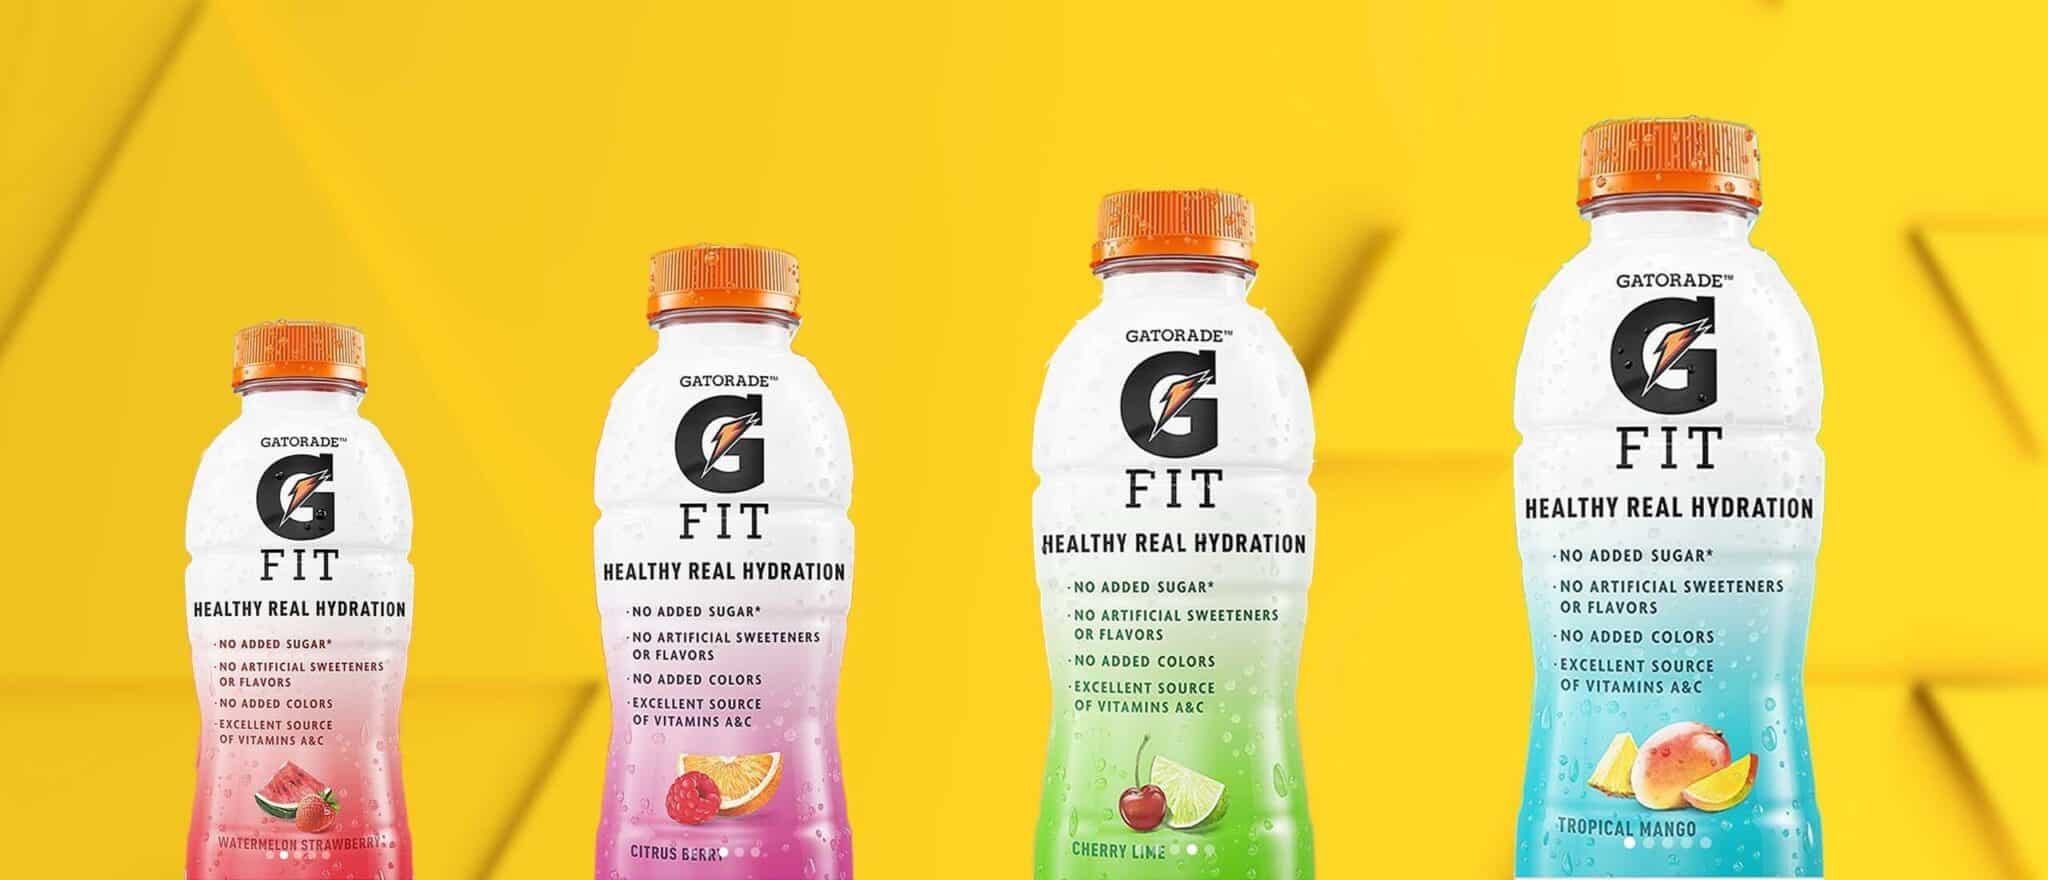 Gatorade Fit Claims to Be Healthy, But Is It?